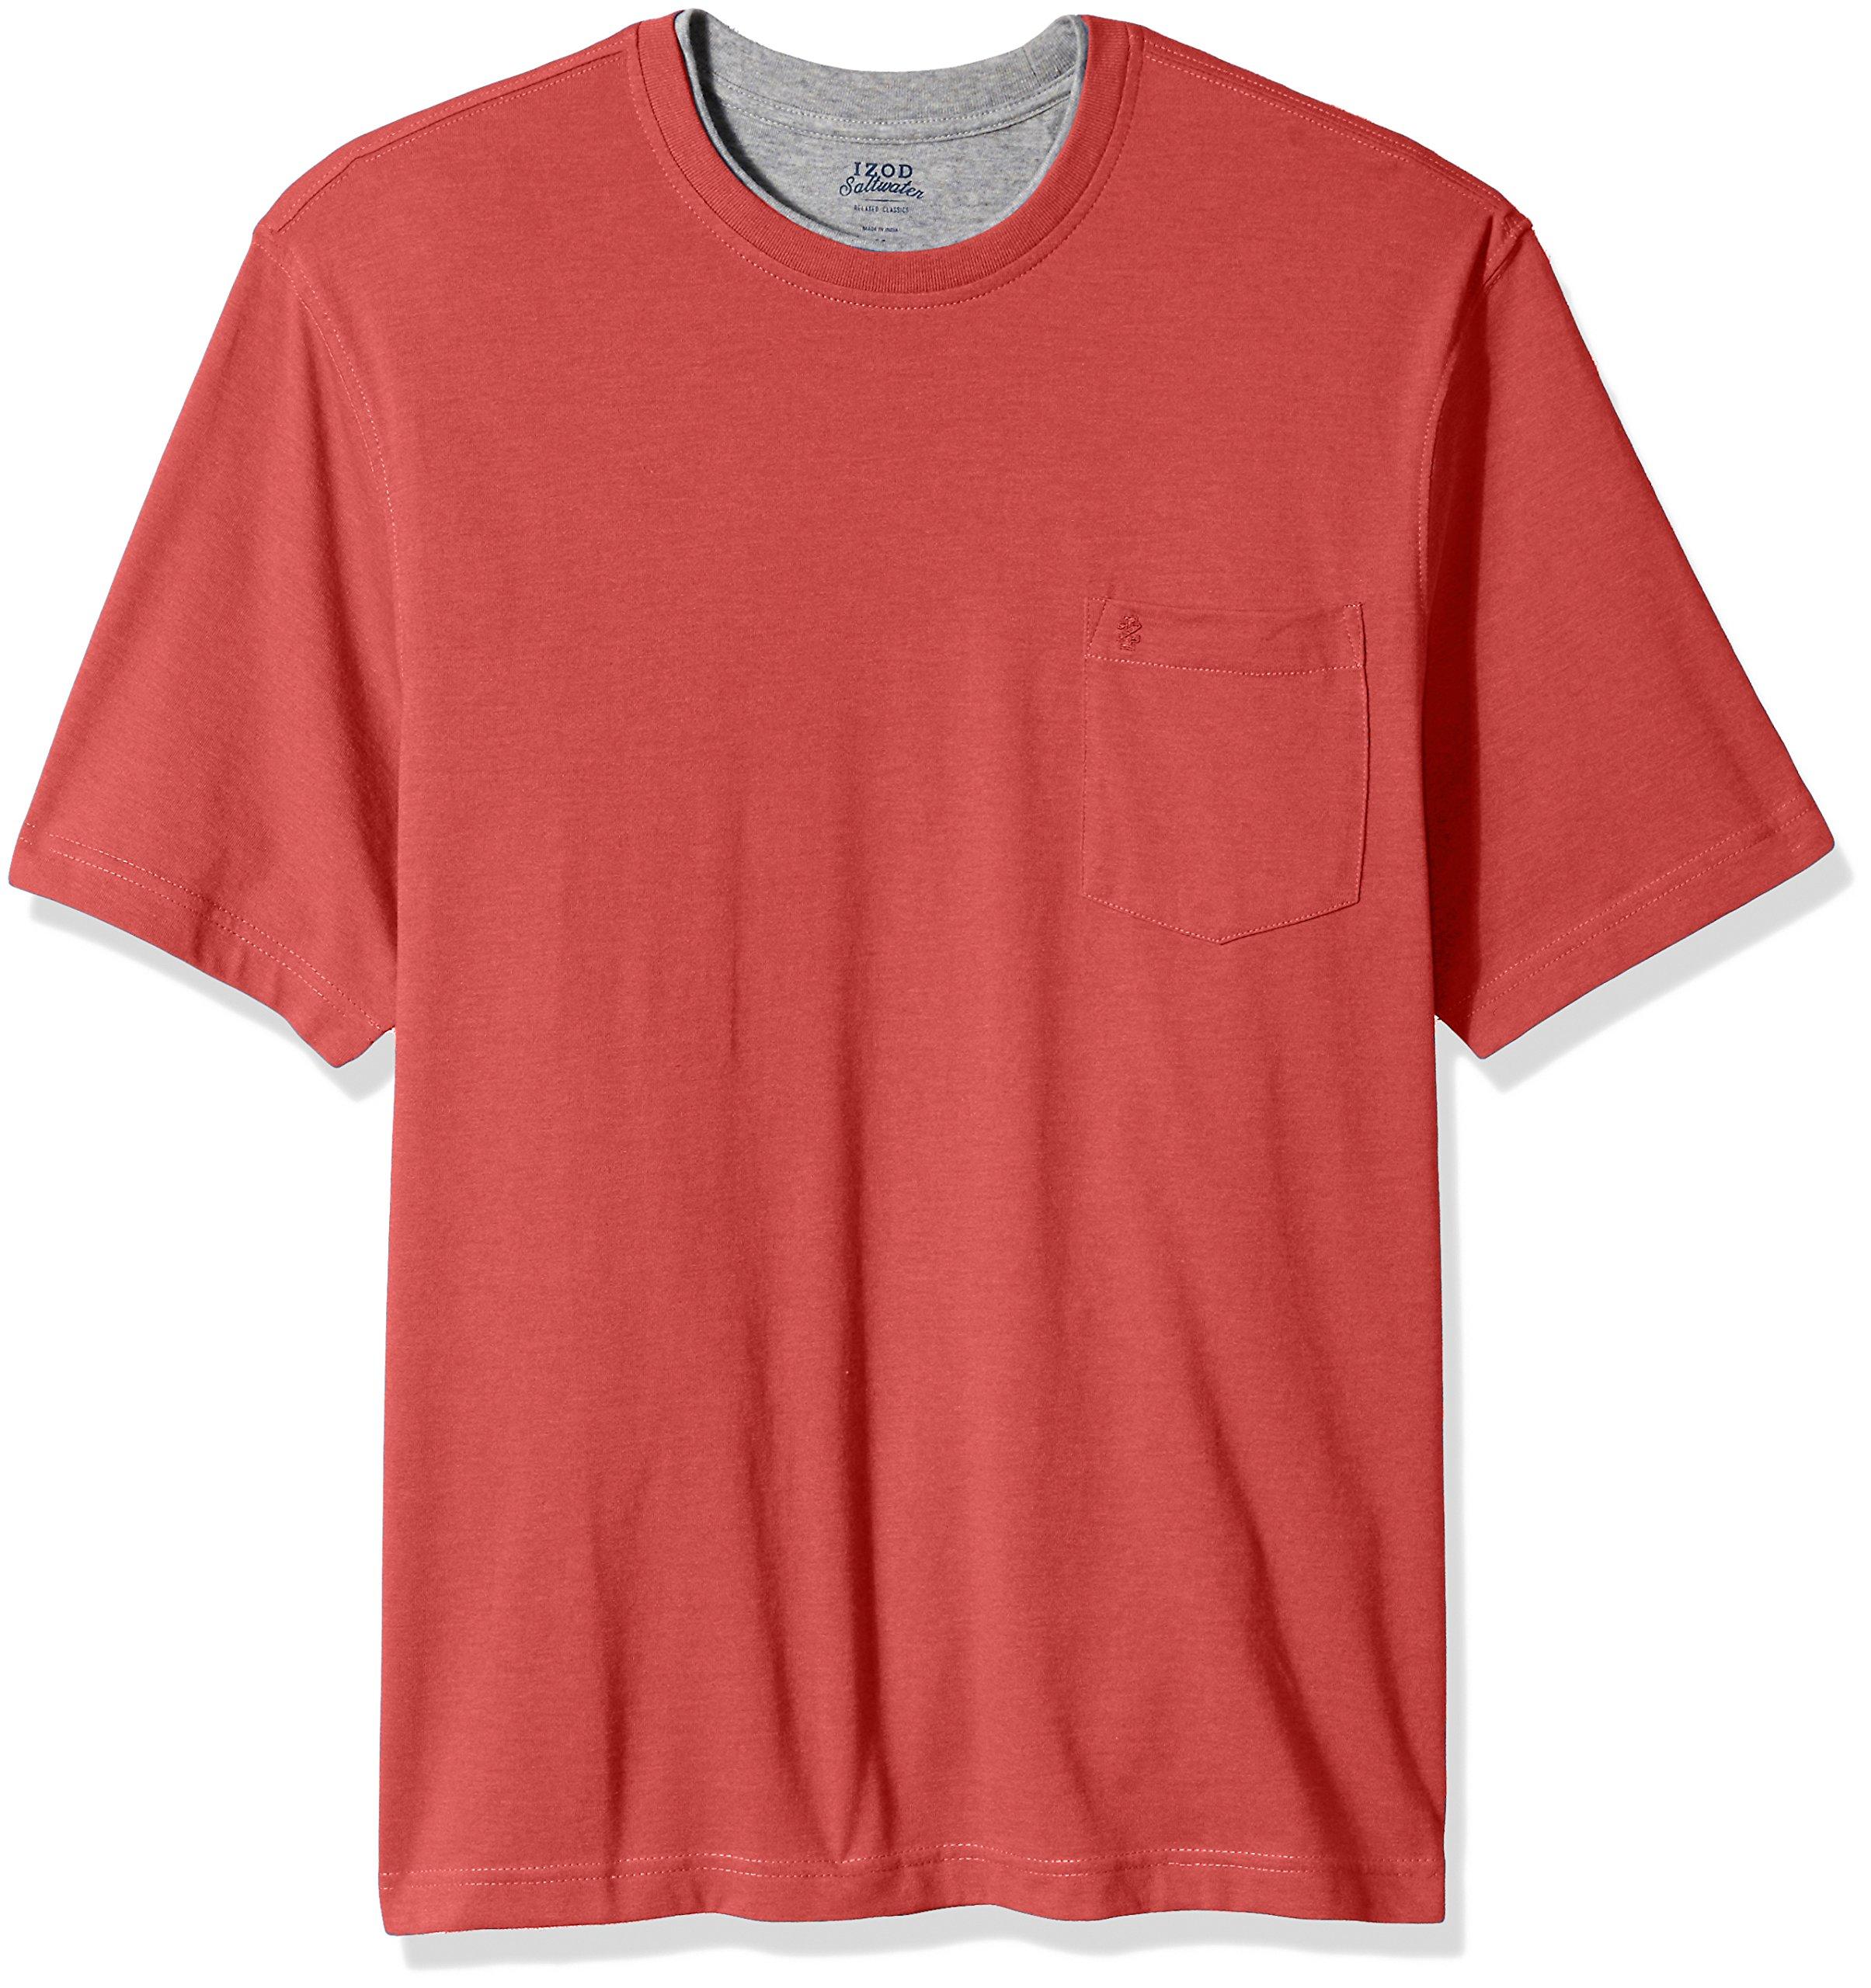 Izod Solid Double Jersey Chatham Point Crew Tee in Red for Men - Lyst